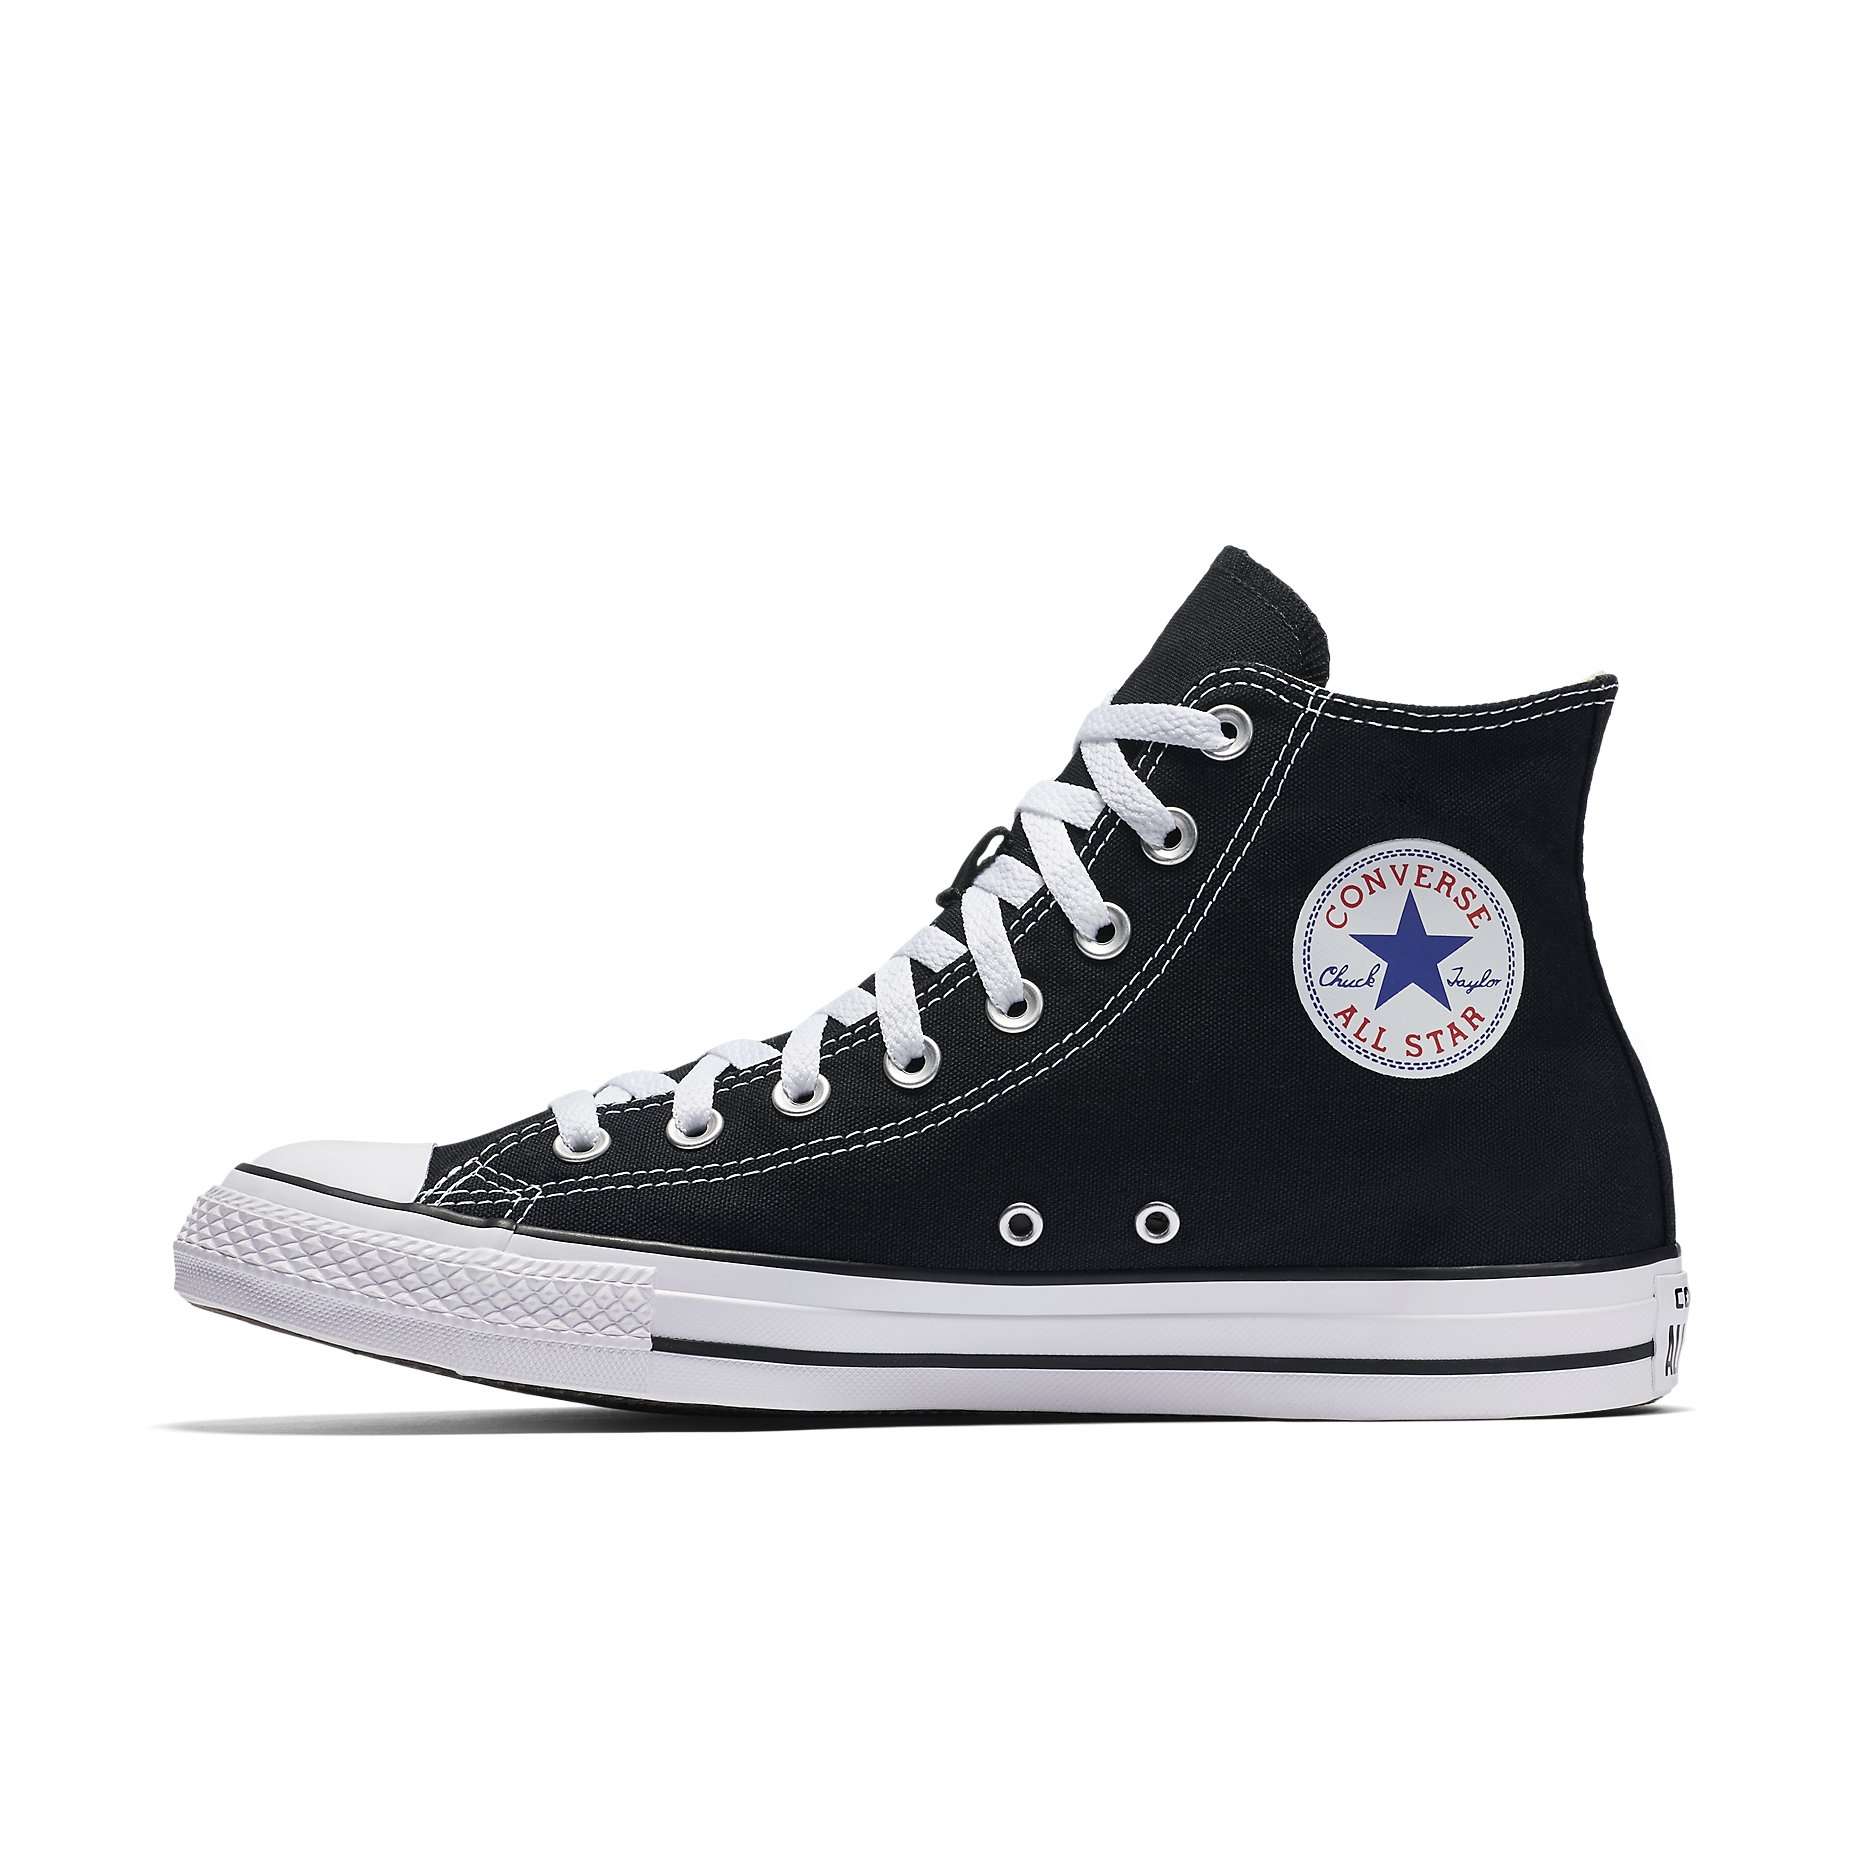 New Converse Chuck Taylor All Star High Top Sneakers ...